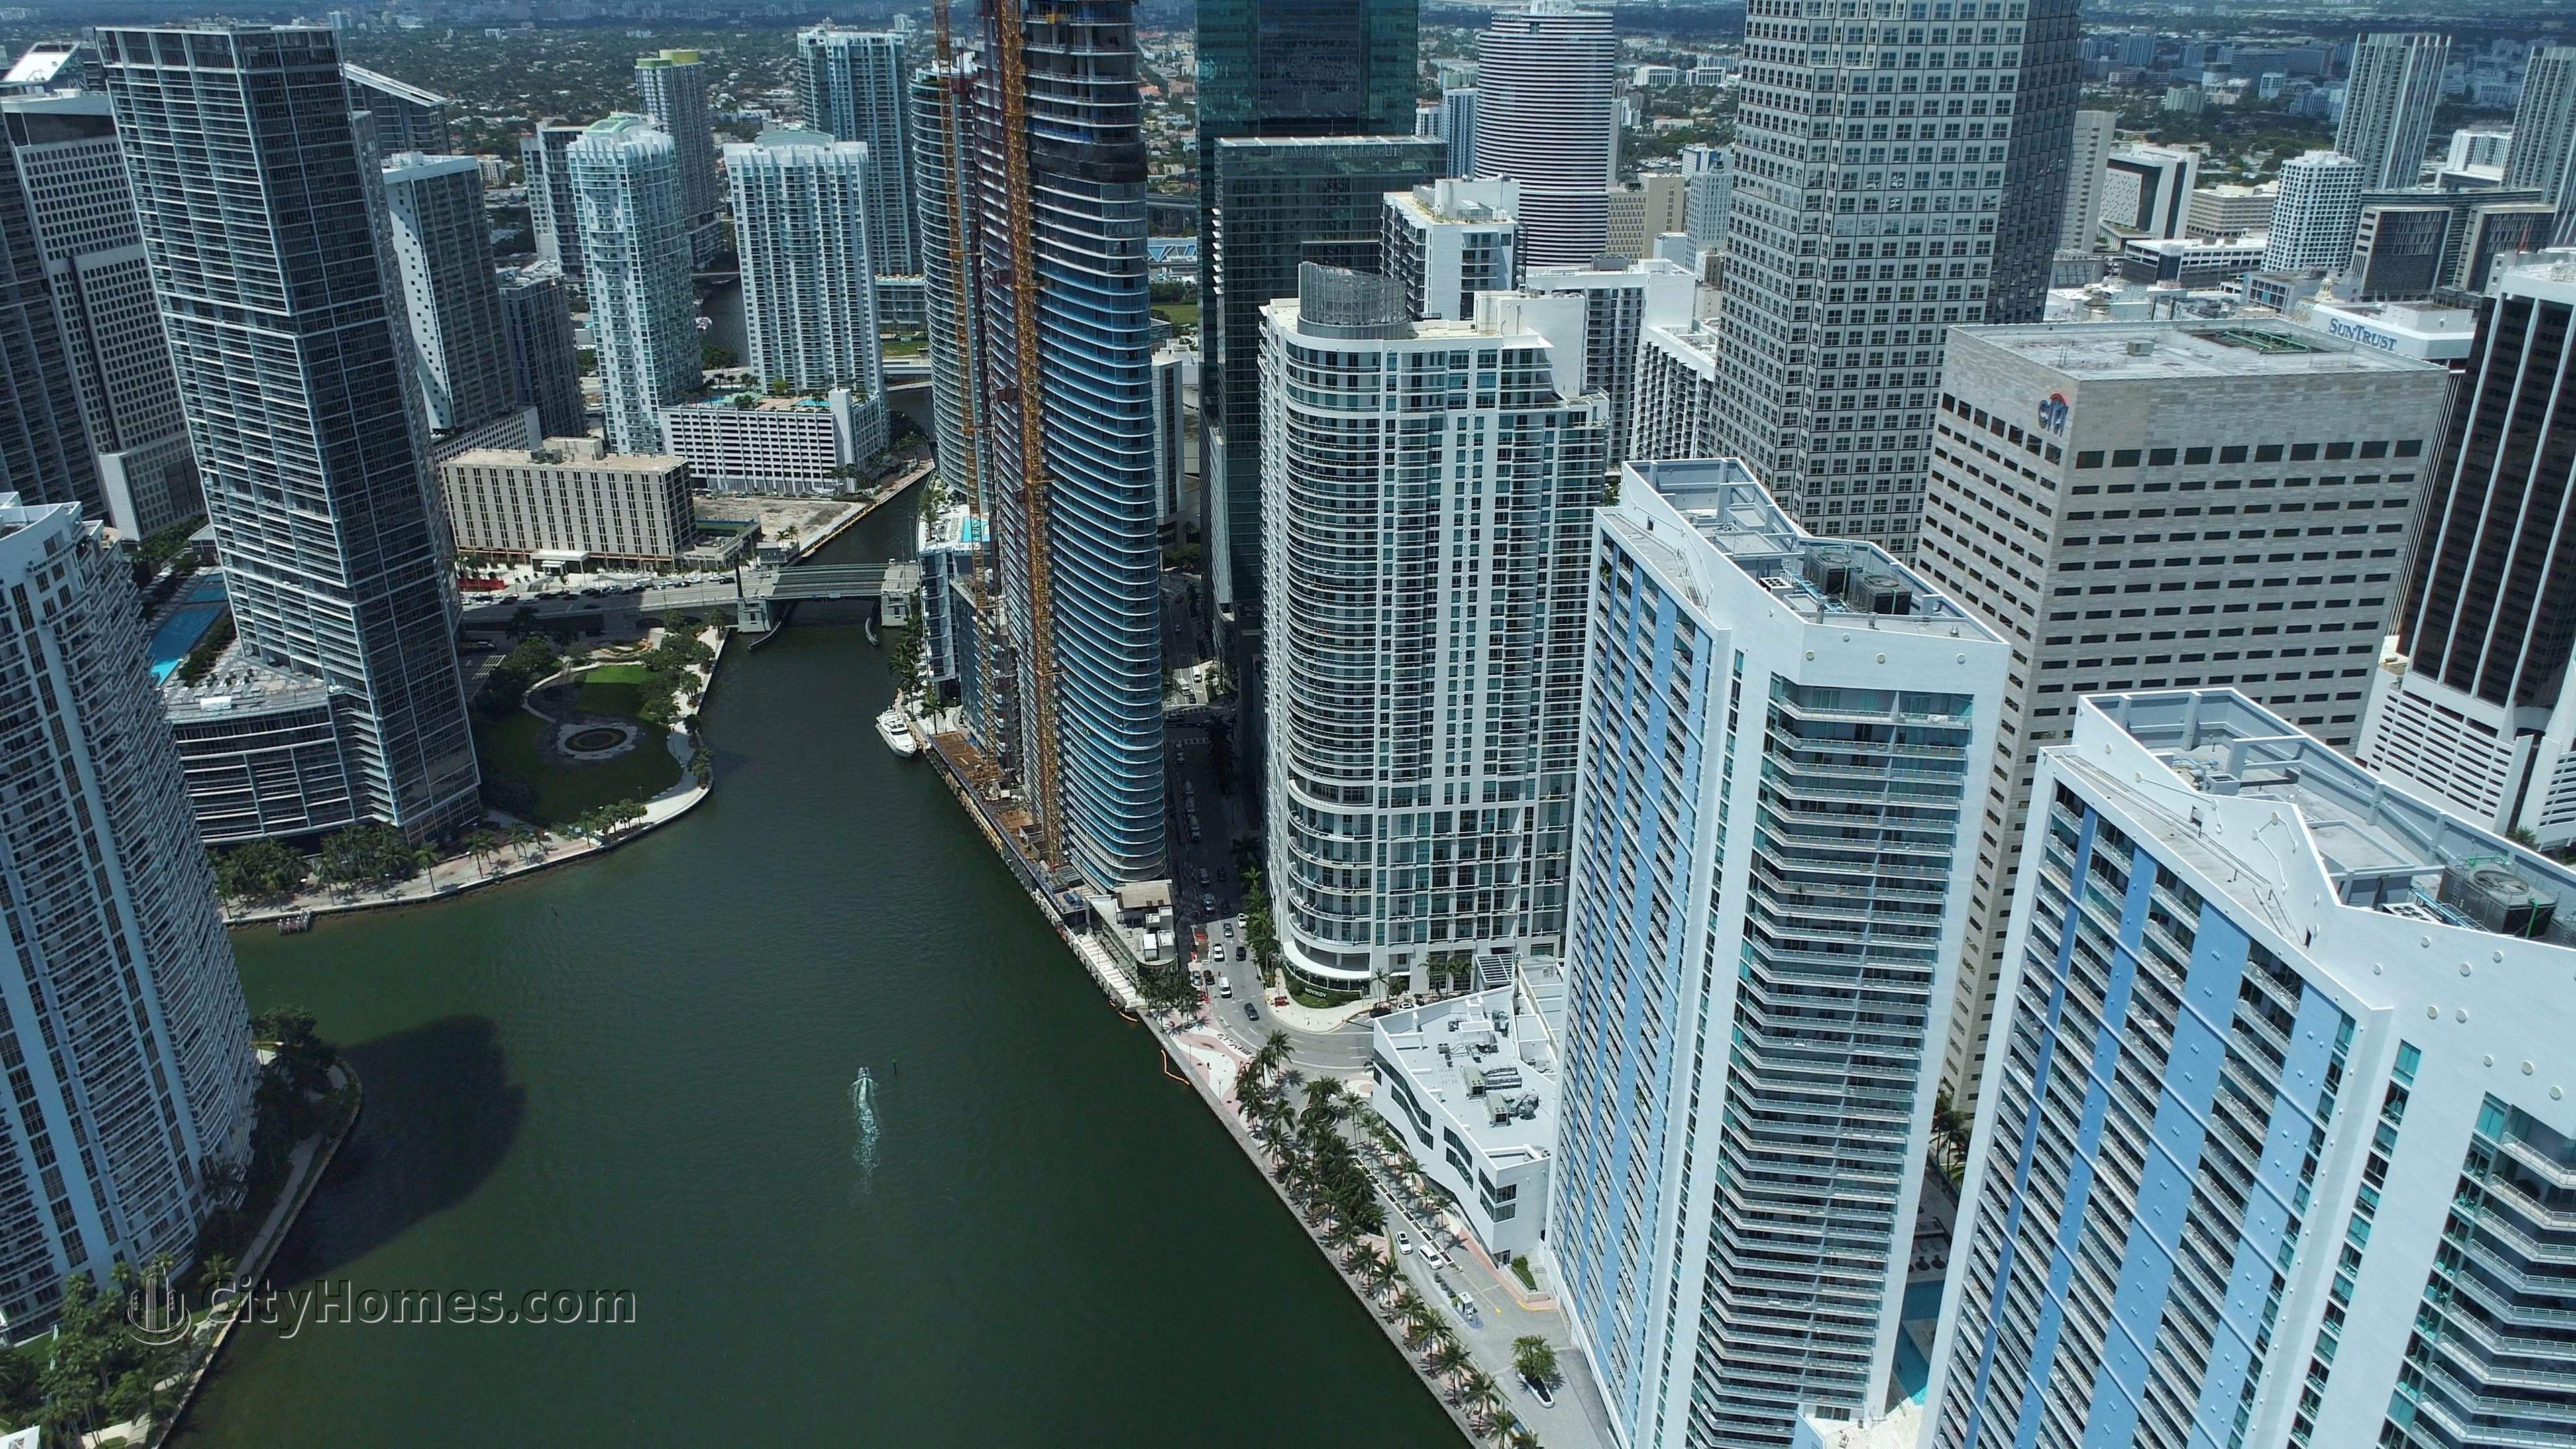 5. One Miami xây dựng tại 325 And 335 S Biscayne Blvd, Miami, FL 33131